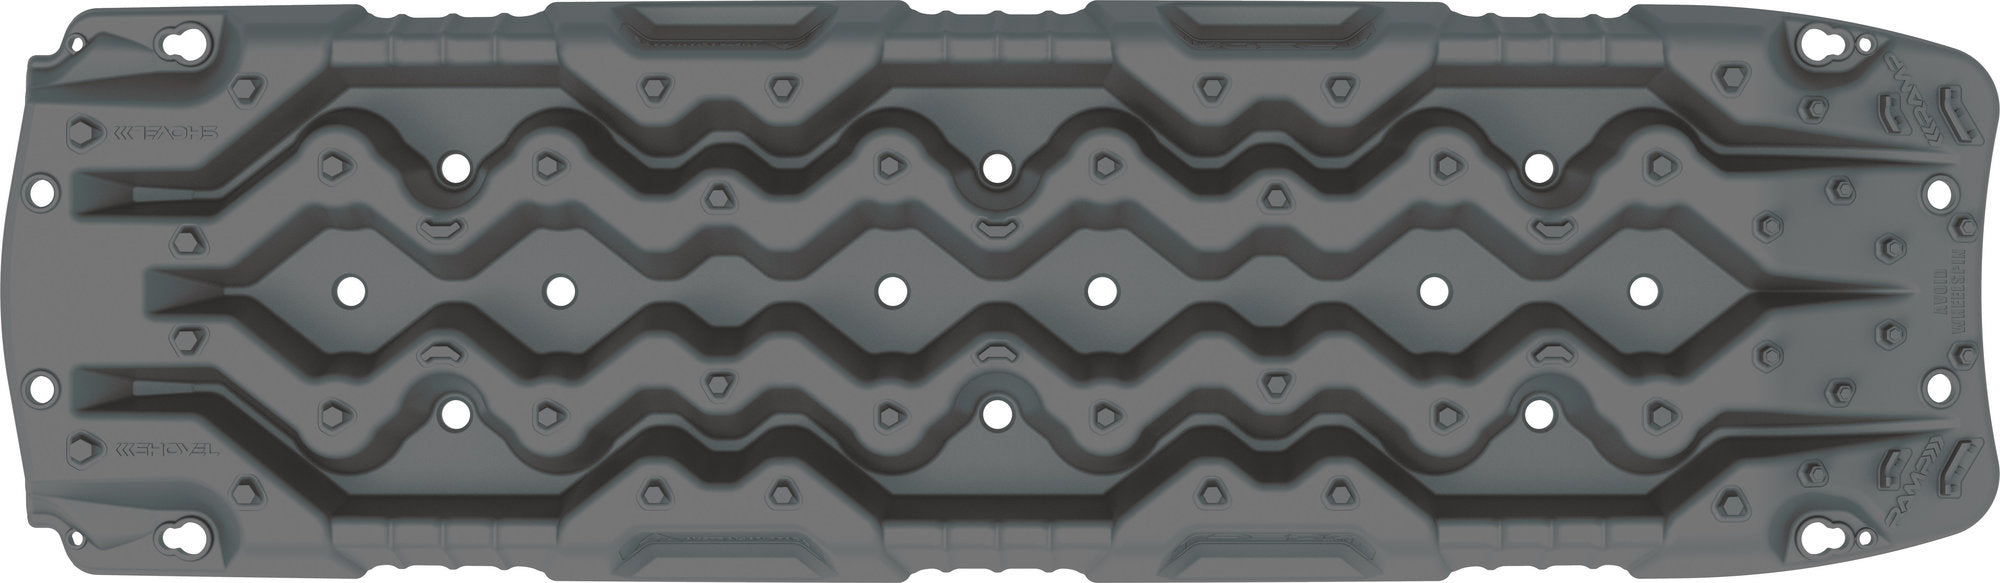 ARB Tred GT Recovery Boards - Gunmetal Grey